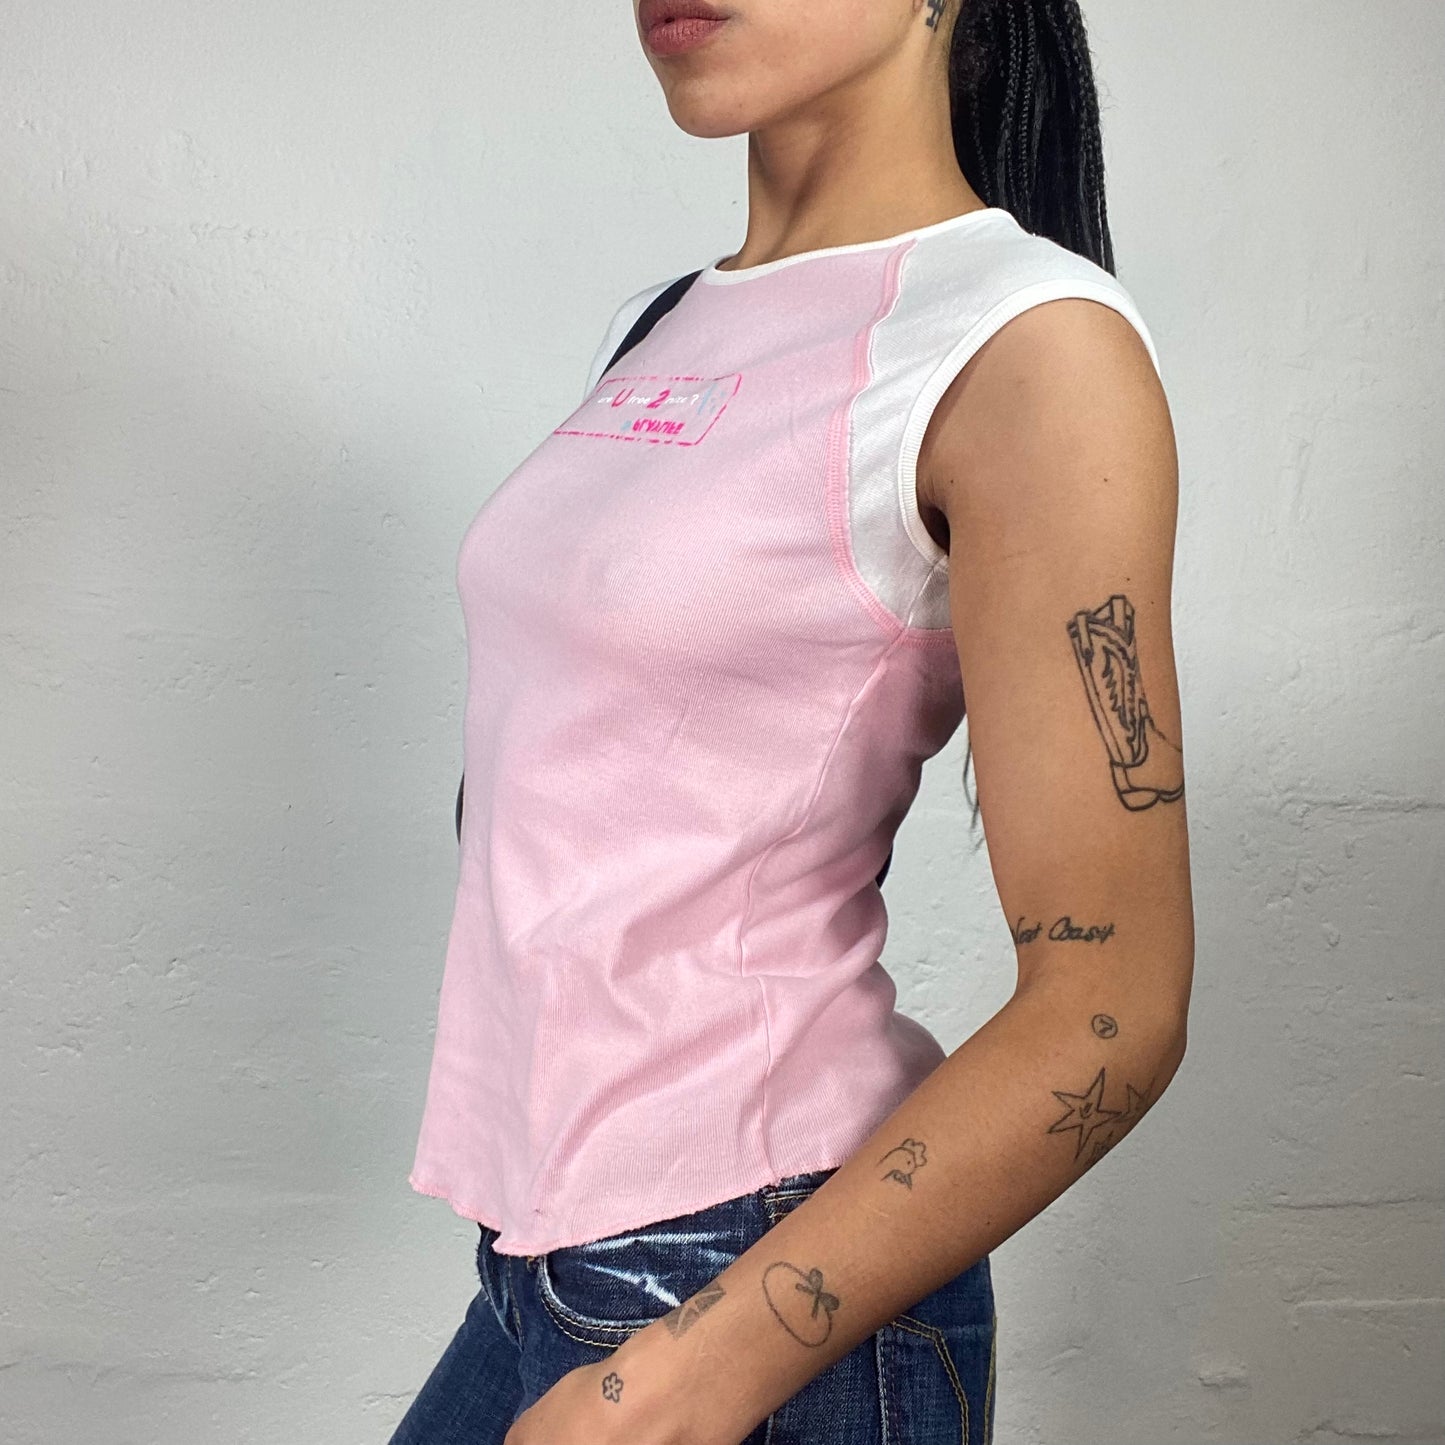 Vintage 2000's Soft Girl Baby Pink Jersey Tee with White Patches and Mini Typo Print (S)